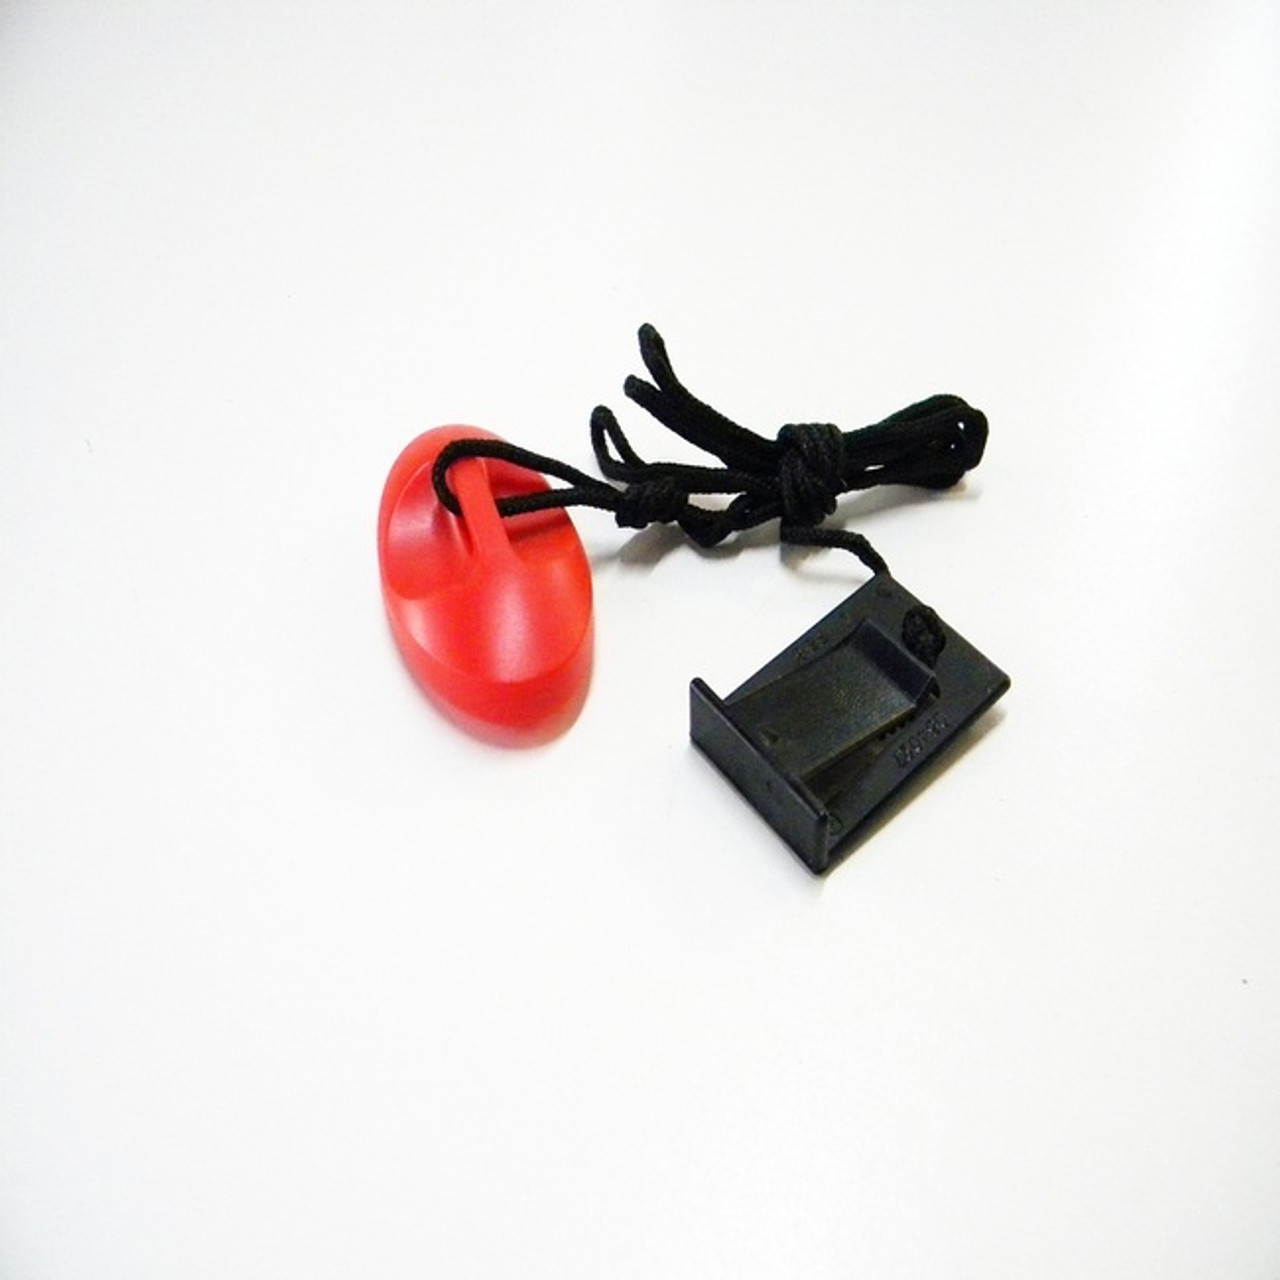 Nordic Track Treadmill Model NTL140111  COMMERCIAL 1750 Safety Key Clip Part Number 303713